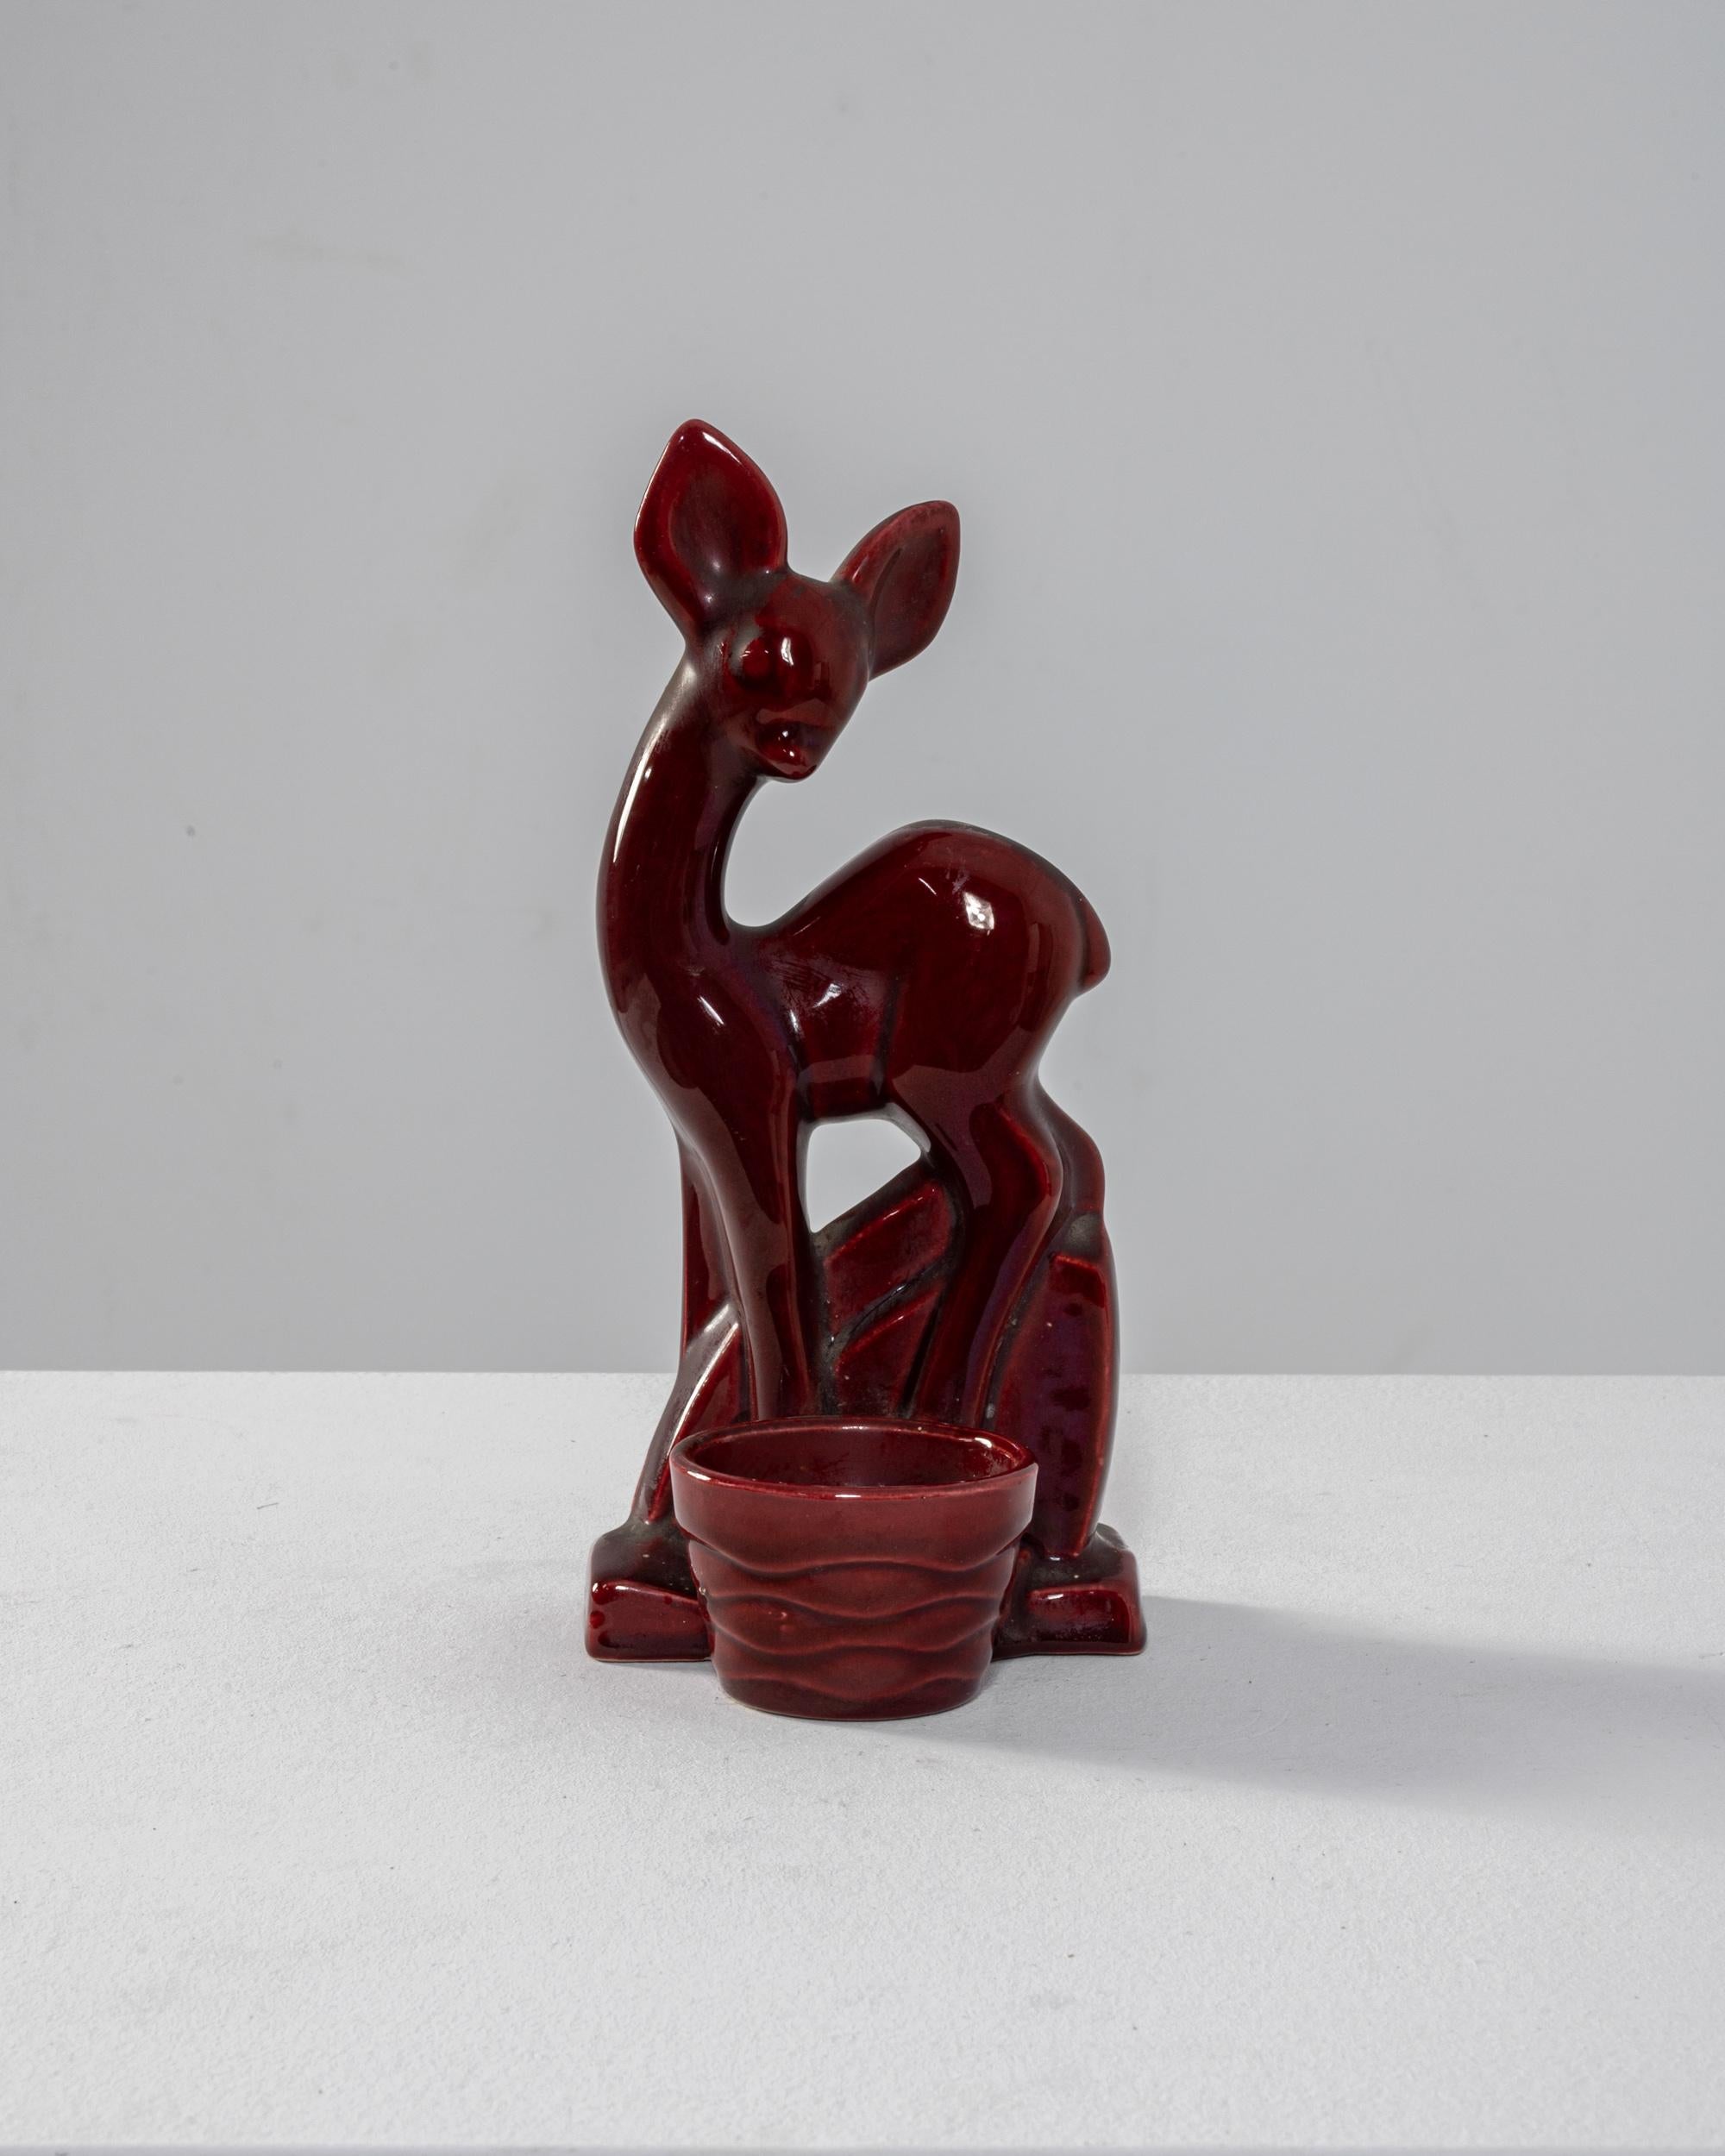 Cherry red and just as sweet, this ceramic deer statuette makes the perfect vintage accent for a tabletop or mantel. Made in France in the 20th century, it depicts a fawn standing behind a woven basket. Big ears and bug eyes make the tiny nose look